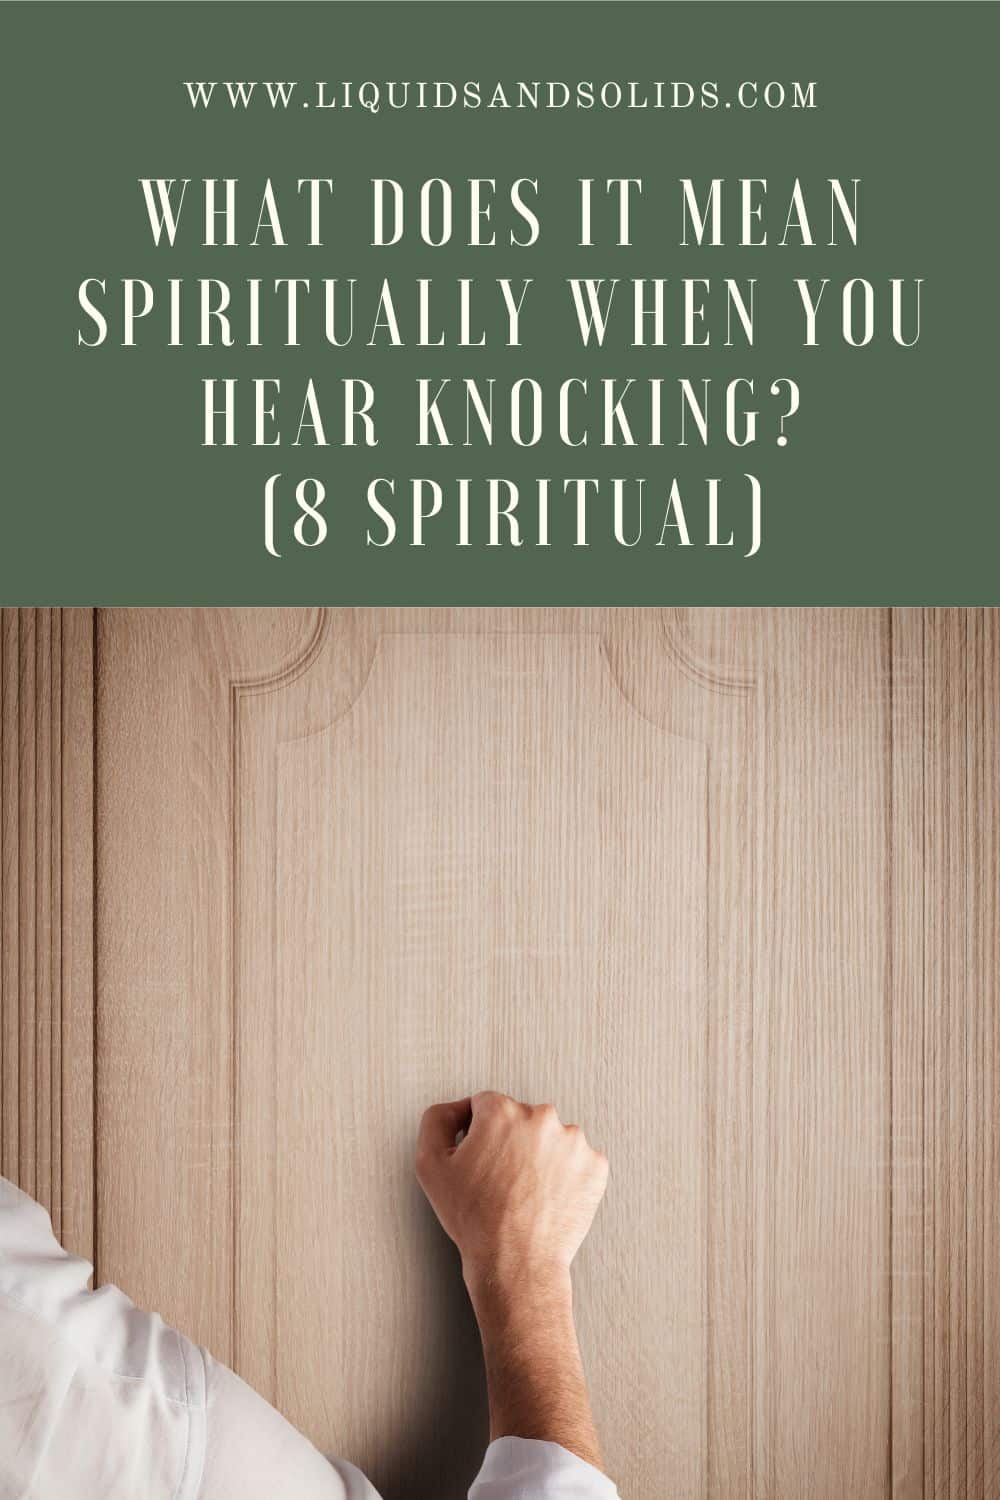 What Is The Spiritual Significance of Hearing a Knock